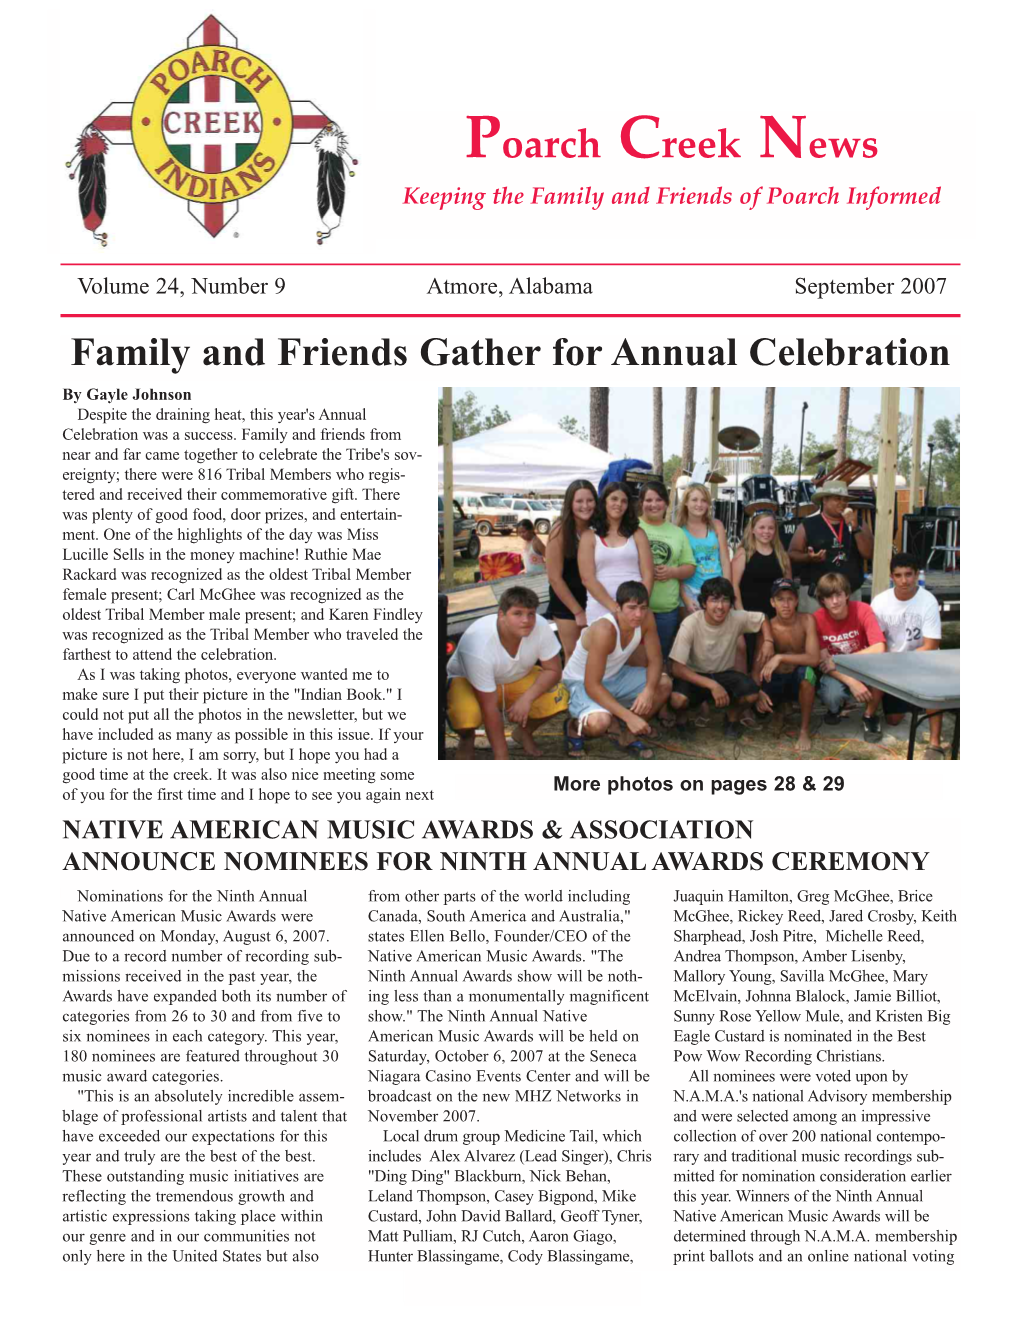 Family and Friends Gather for Annual Celebration Poarch Creek News